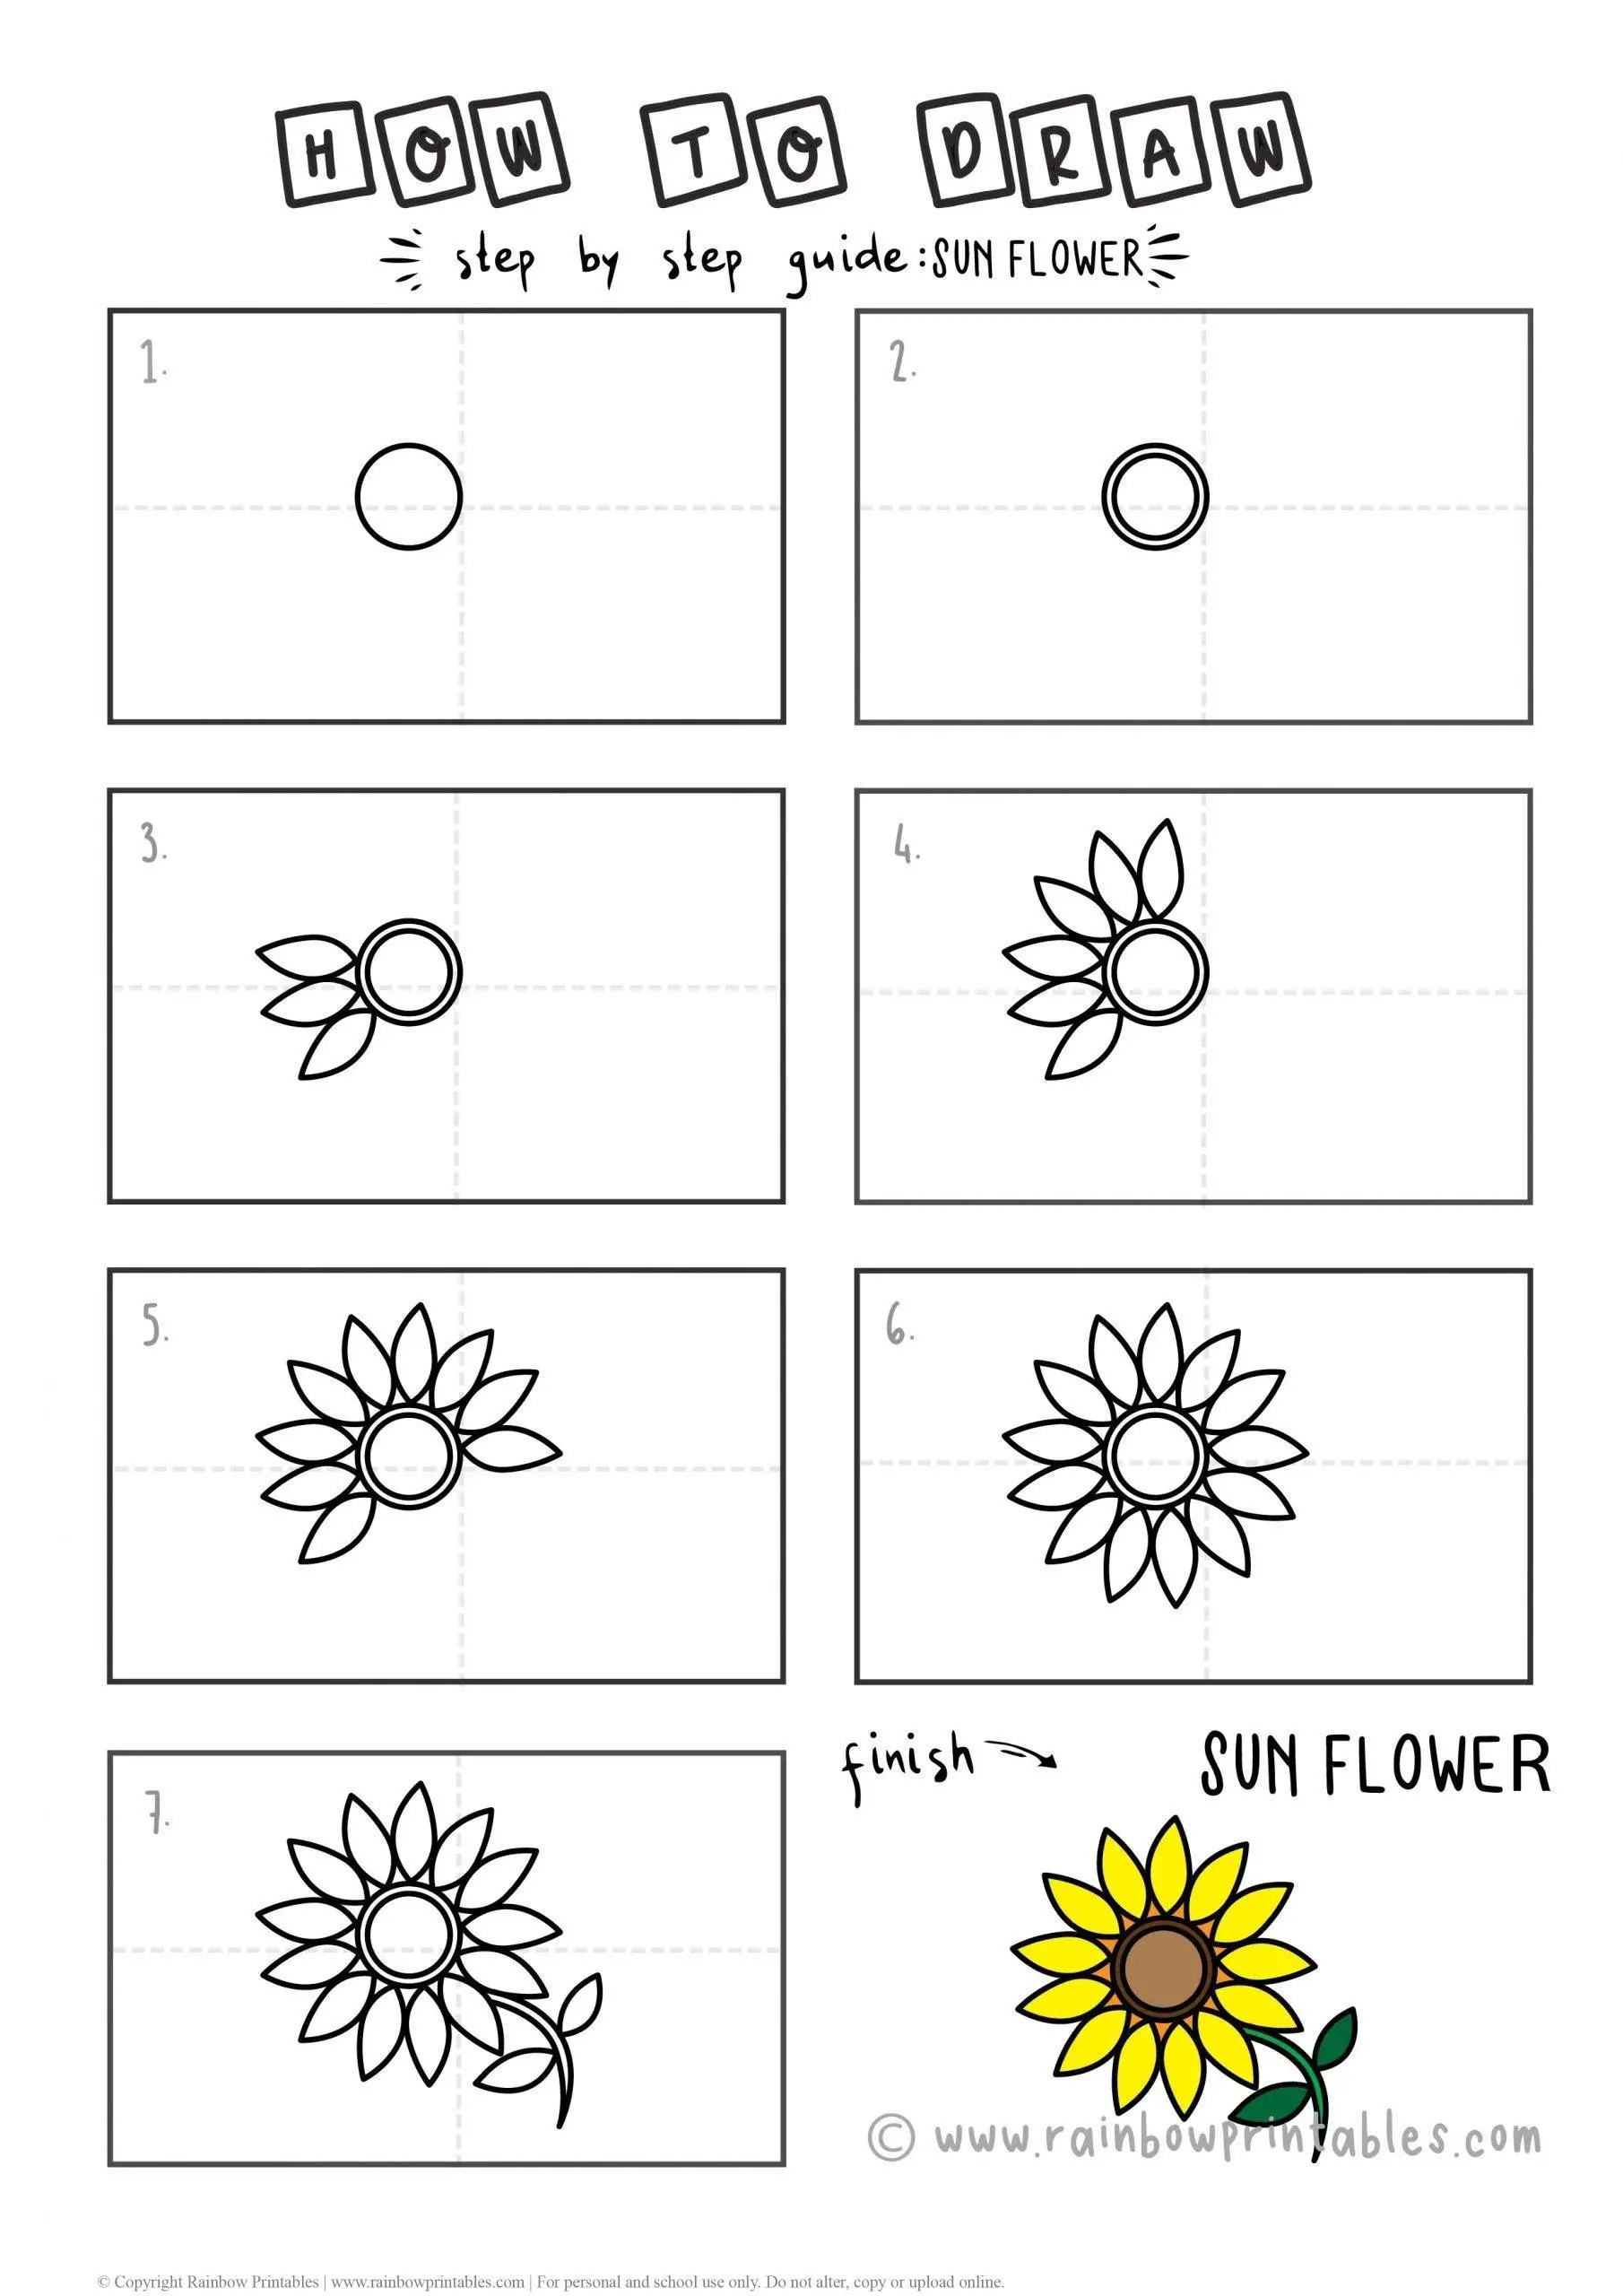 Draw a cute sunflower! Learn how to draw a sunflower in 8 smart steps for preschoolers and k-5 elementary school age students. Your kids will learn to: expand their artistic repertoire, encourage fine motor skills, practice the logical order of 3d objects to 2d shapes. Beginners drawing tips, easy drawing, drawing techniques for children, drawing ideas, simple doodles, simple drawing, #howtodraw #drawingtips Tutorial Guides for Kids, Art Project Ideas for Children.